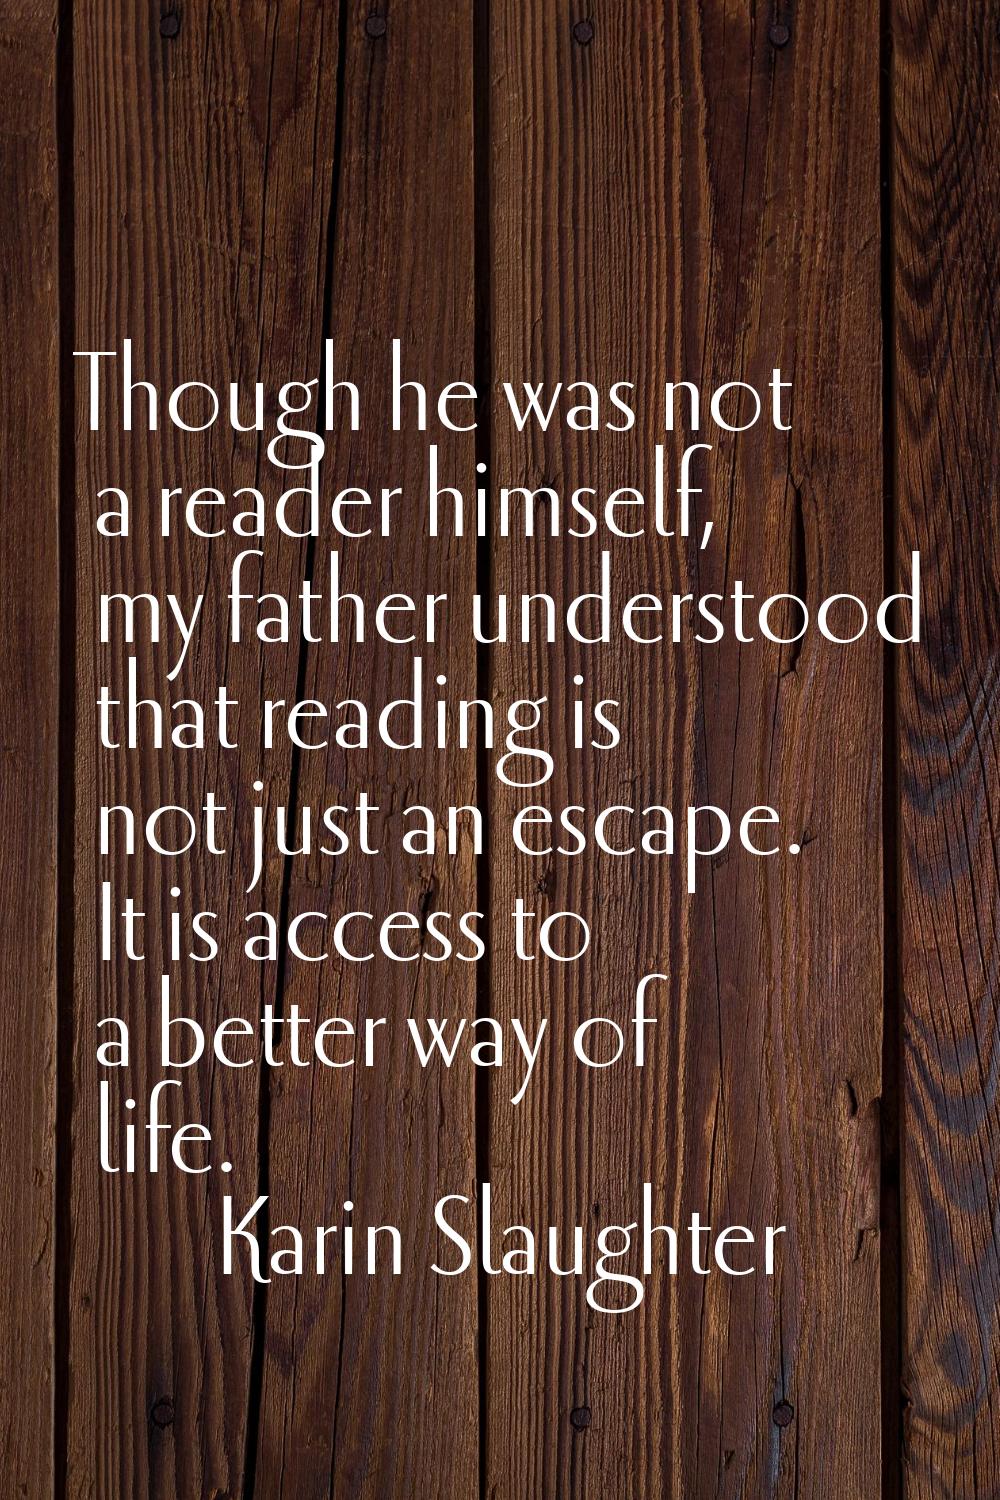 Though he was not a reader himself, my father understood that reading is not just an escape. It is 